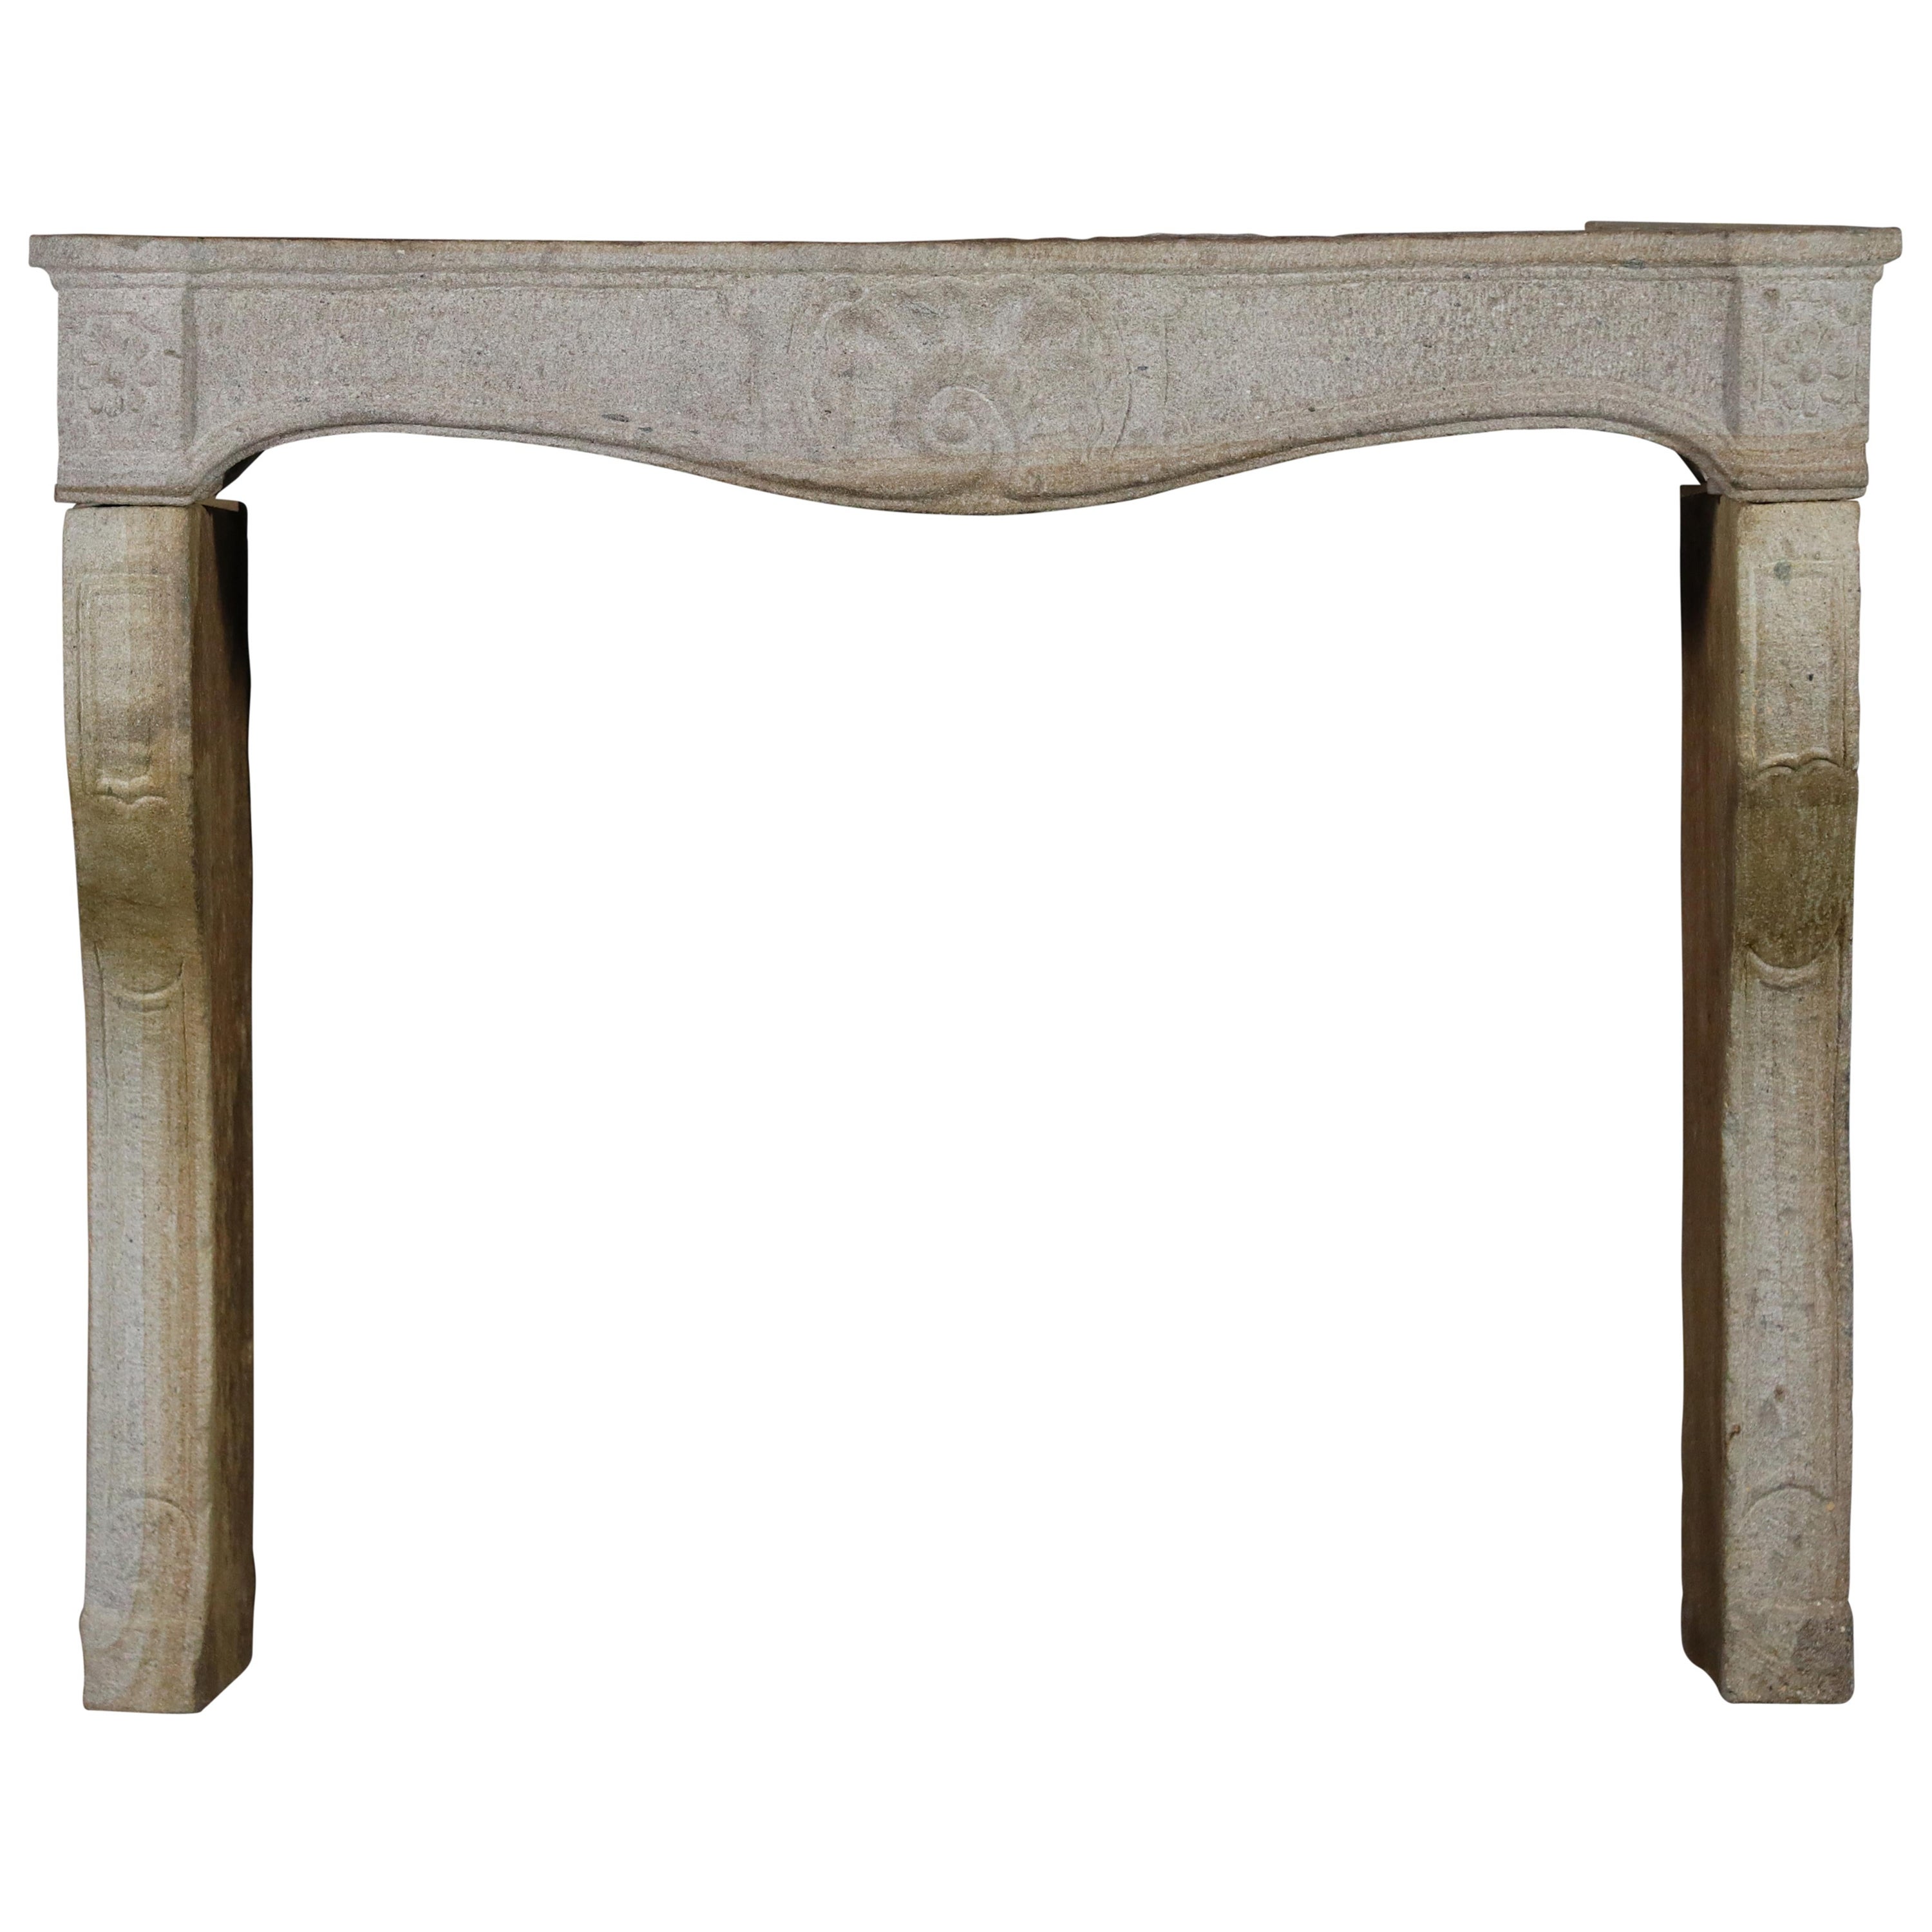 18th Century Normandy Granite Fireplace For Rustic Slow Living Interior Design For Sale